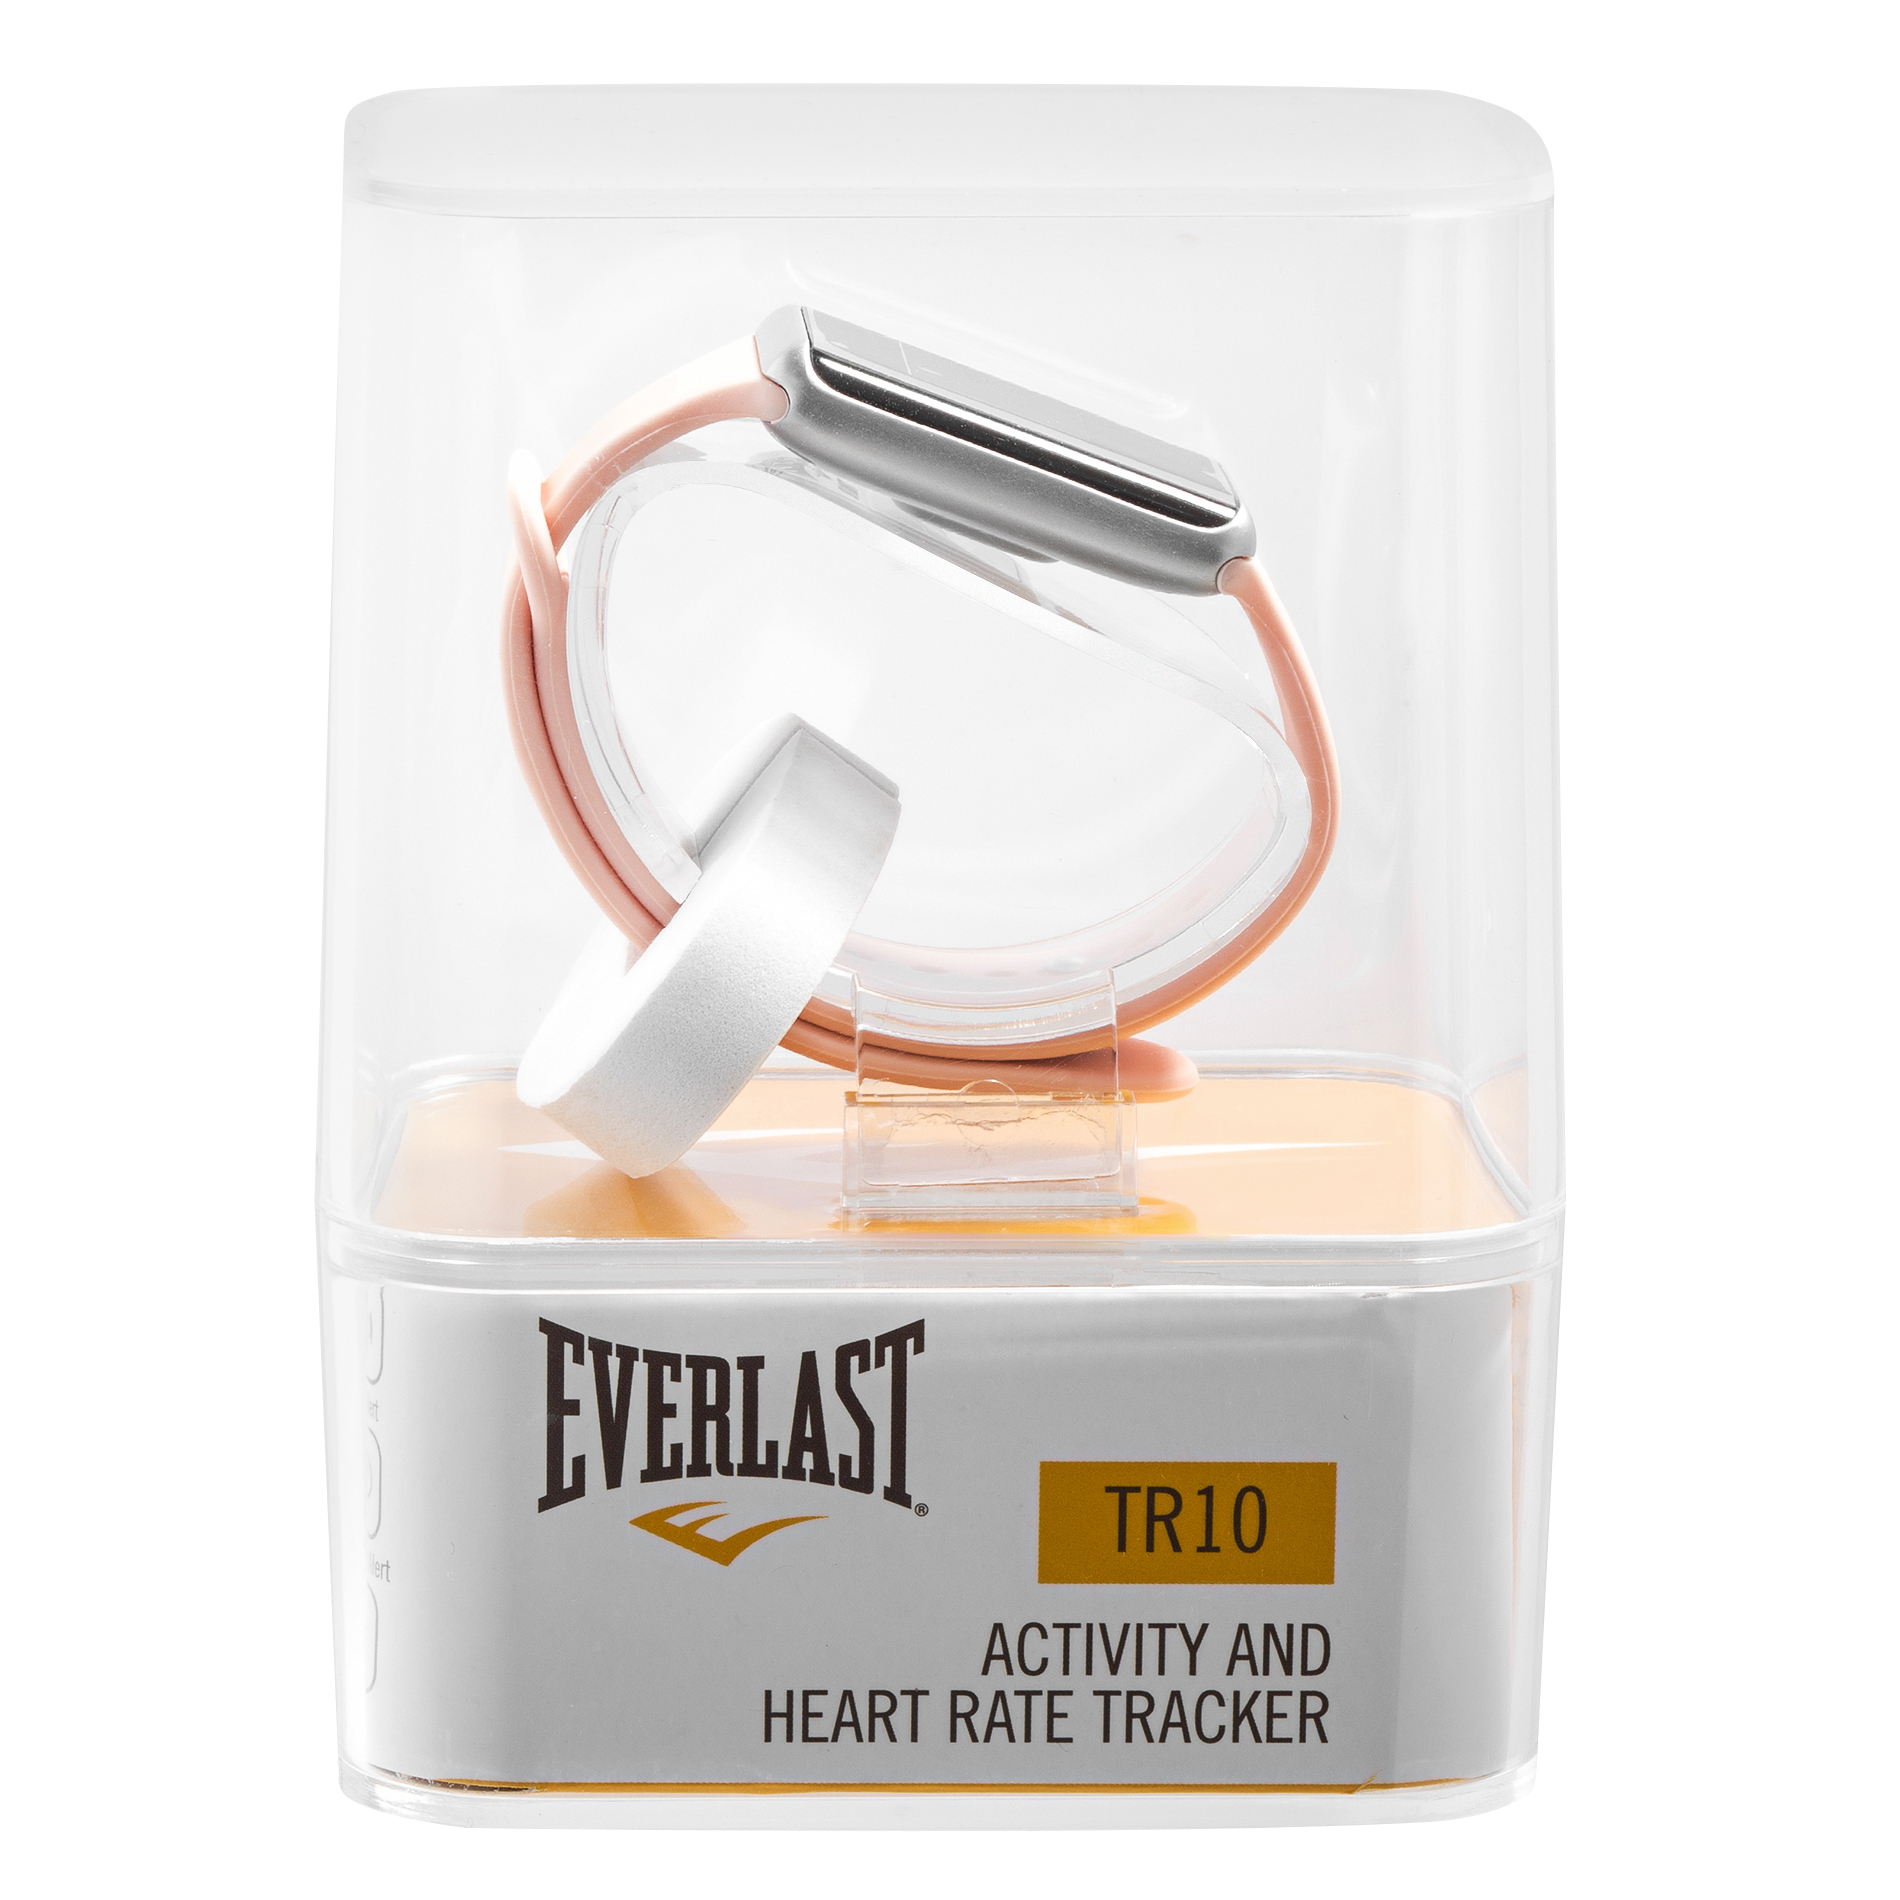 Everlast TR10 Blood Pressure and Heart Rate Monitor Activity Tracker; Includes Caller ID and Message Previews - image 4 of 6